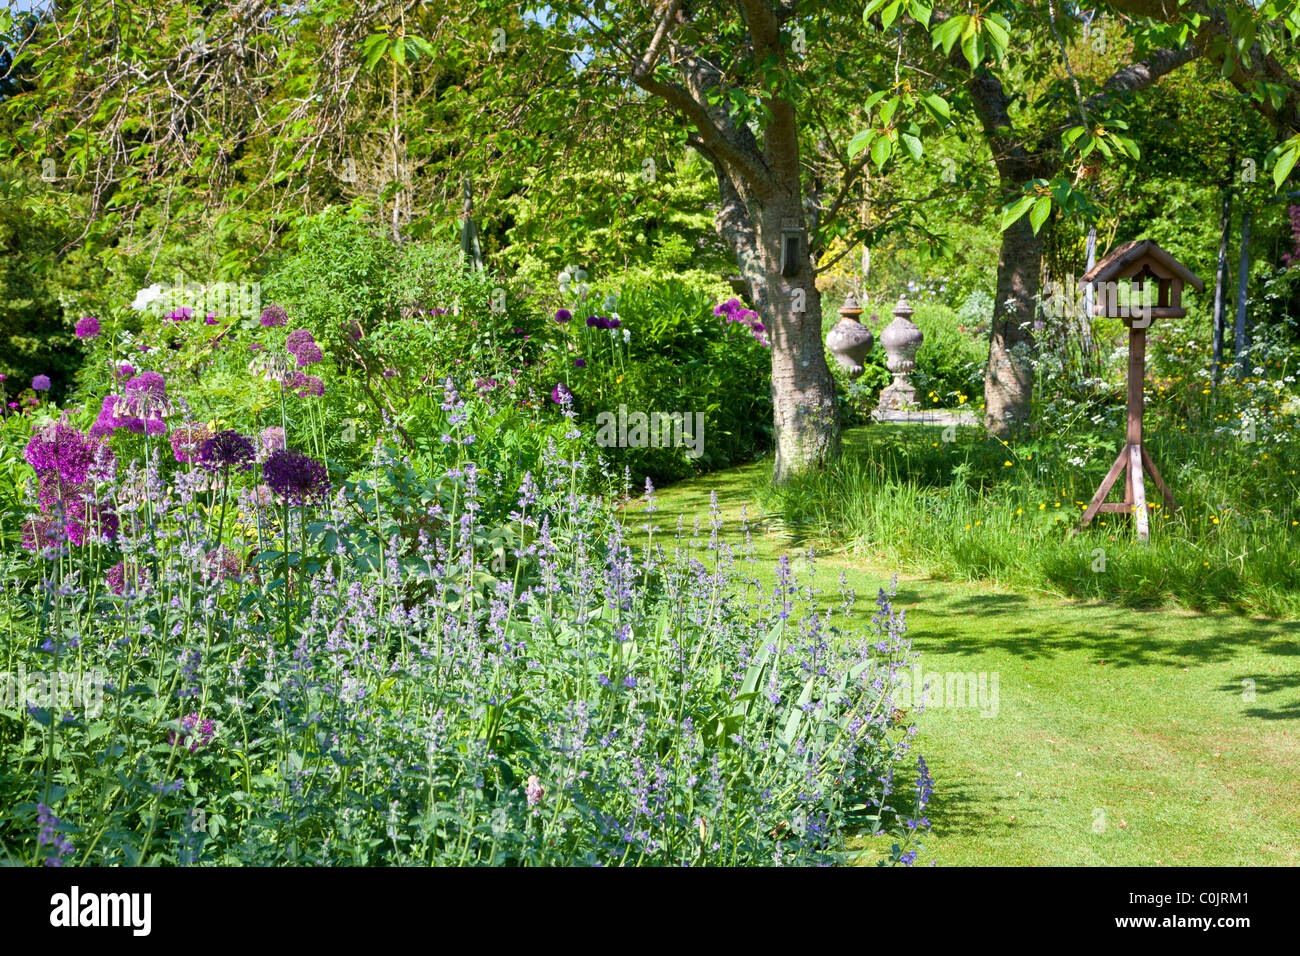 A corner of an English country garden with a grassy path leading between flower borders and a clump of shady trees Stock Photo